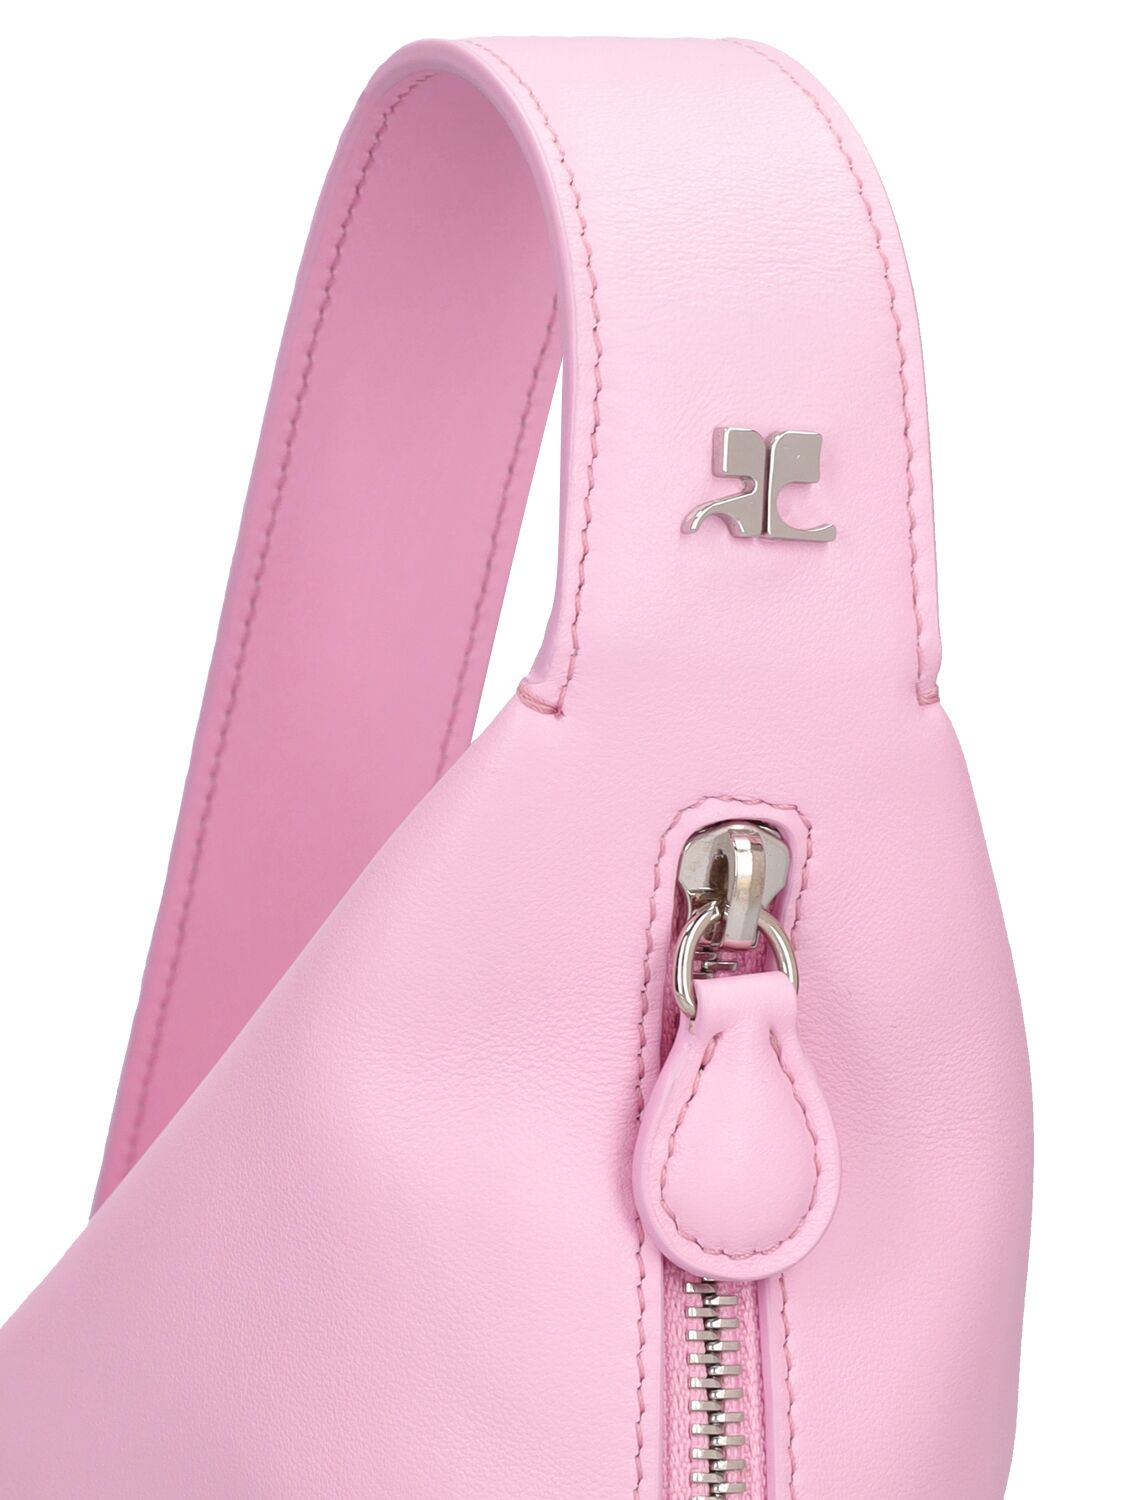 Shop Courrèges The One Leather Shoulder Bag In Candy Pink